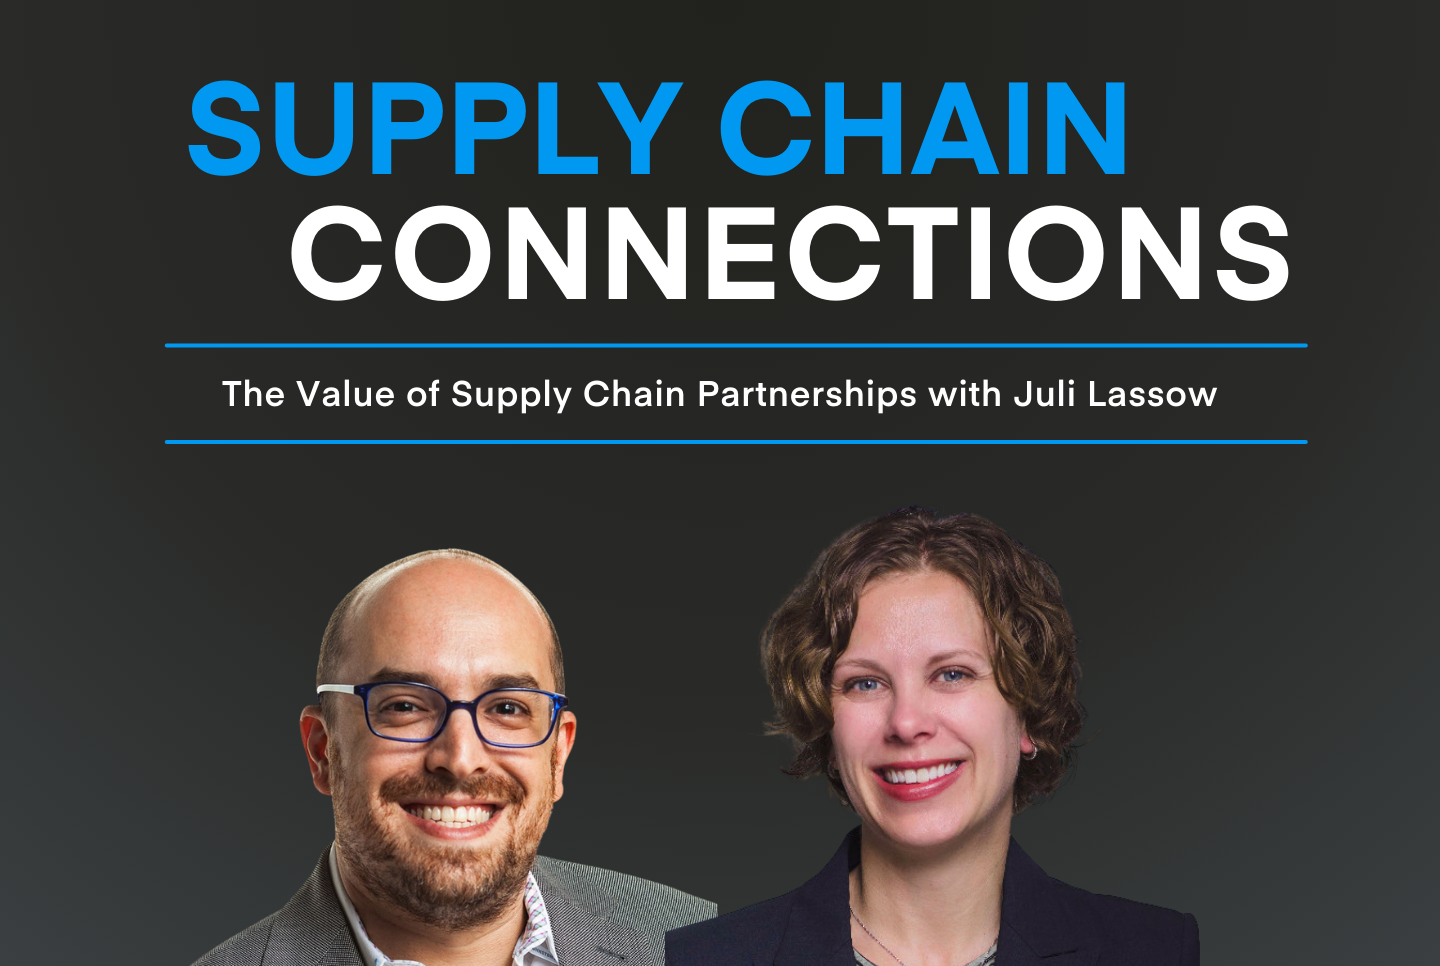 The Value of Supply Chain Partnerships with Juli Lassow on the Chain.io Supply Chain Connections Podcast